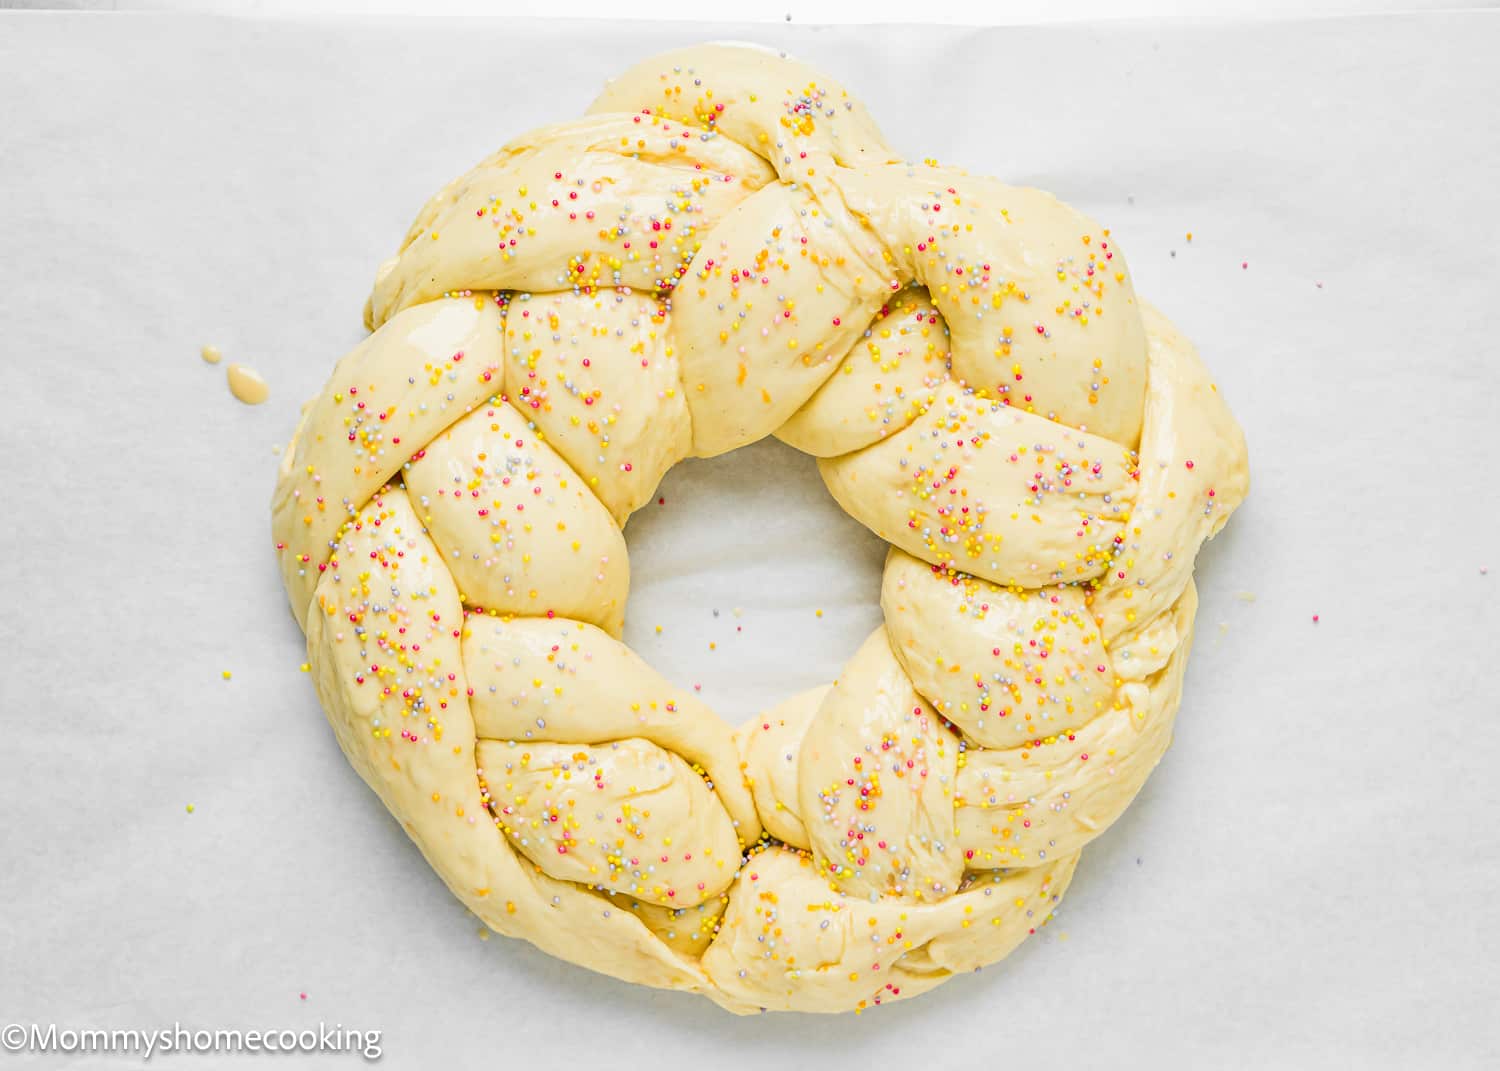 unbaked Easter Sweet Bread with sprinkles over a baking tray.